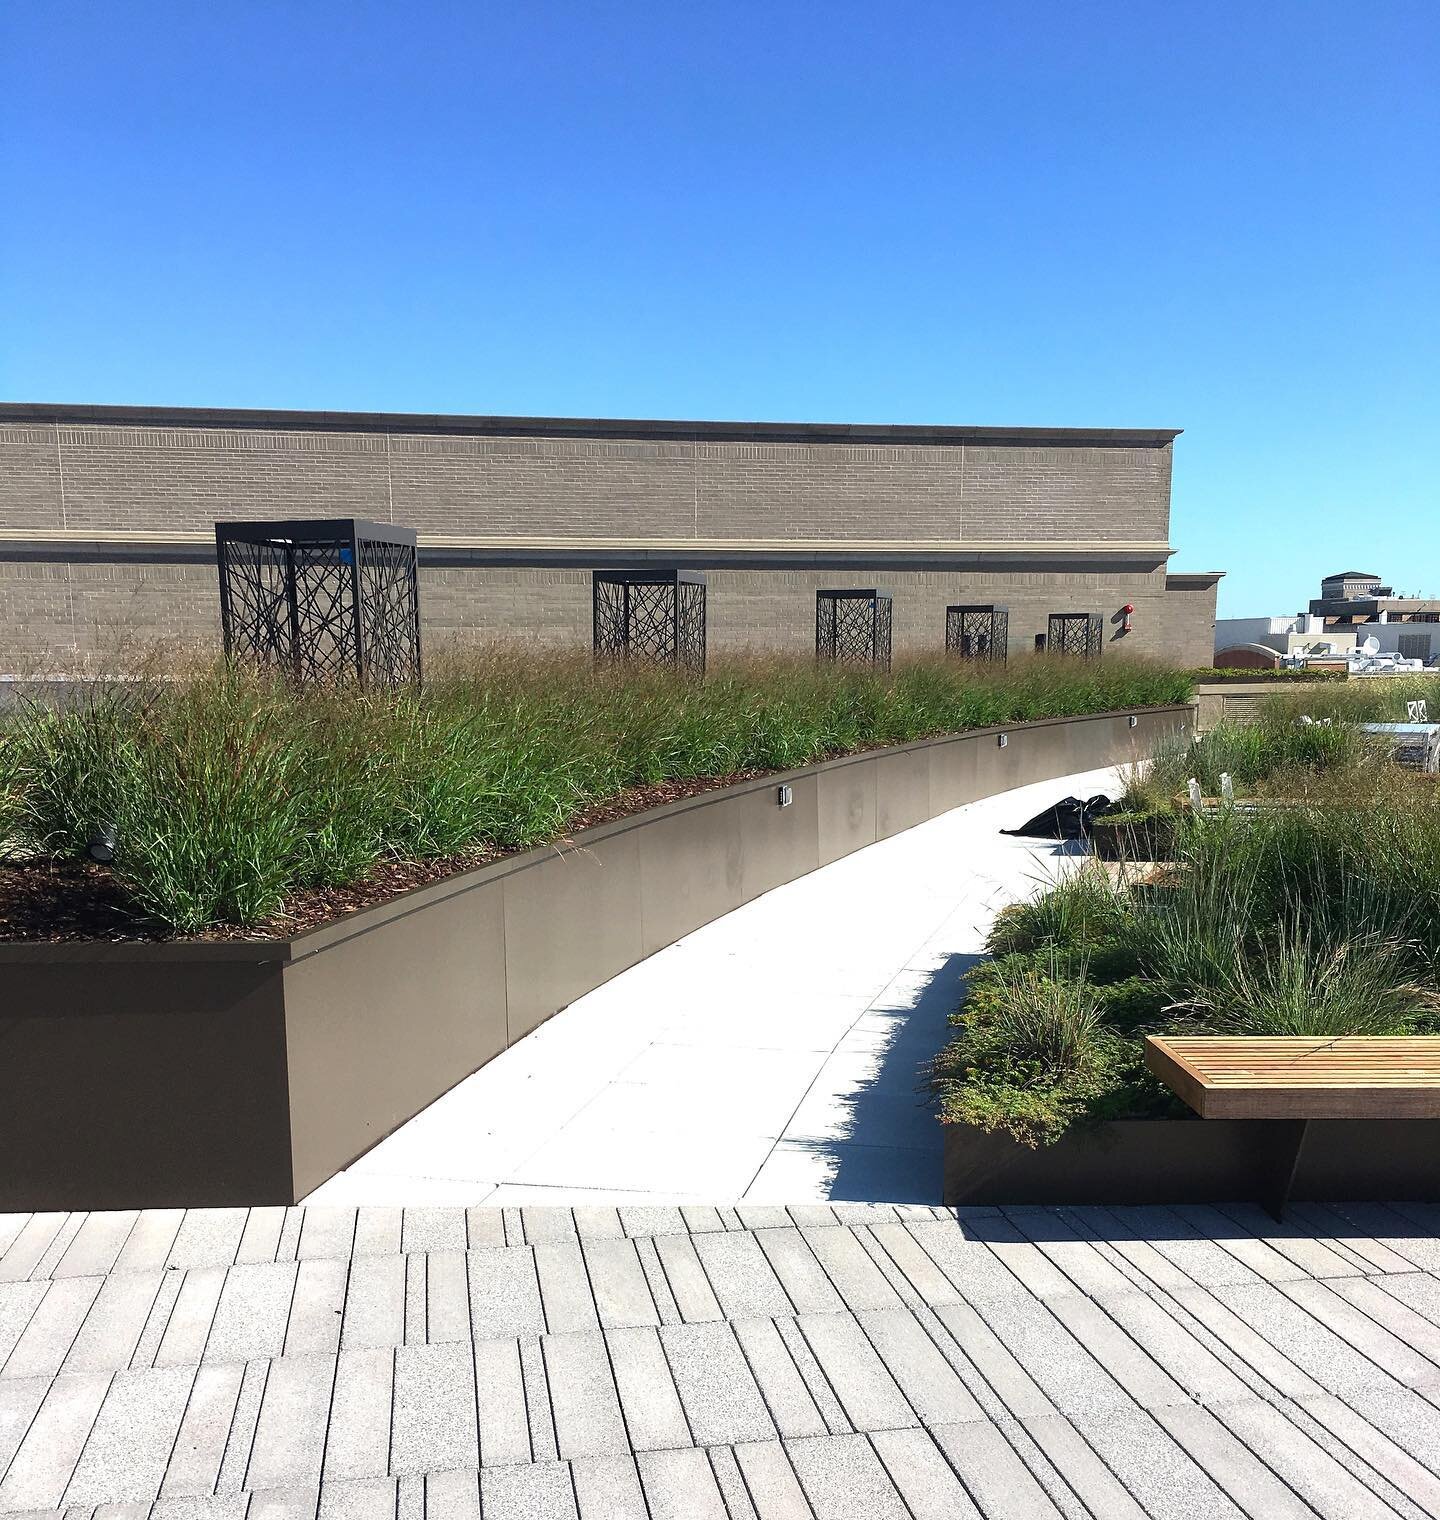 &ldquo;Some people look for a beautiful place, others make a place beautiful&rdquo;
-Hazrat Inavat Khan

#greenroof #amenityterrace #greenbuilding #greenconstruction #plants #amenityroof #greendesign #greenroofs #elevateyourspace #commercialconstruct